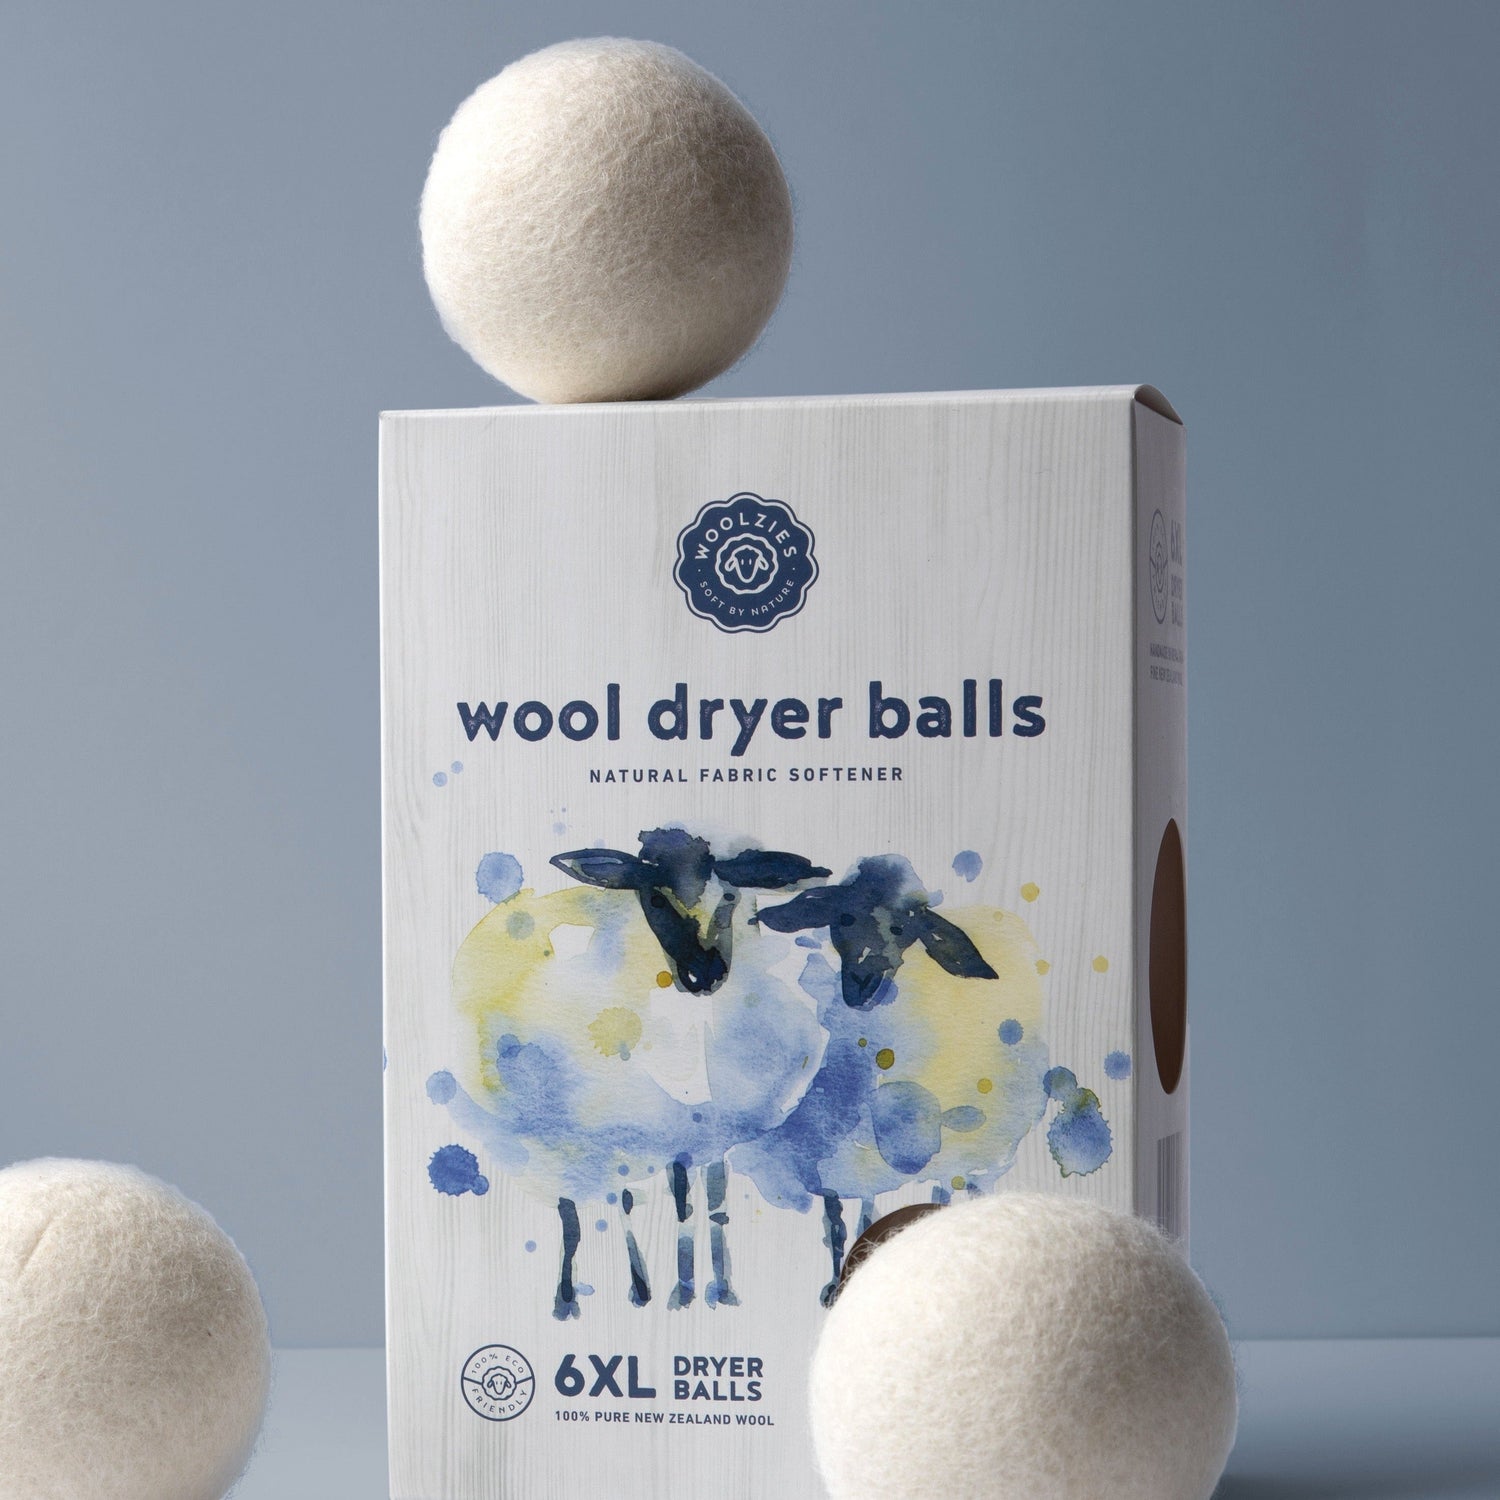 Wool dryer ball scents  Essential oils cleaning, Essential oil